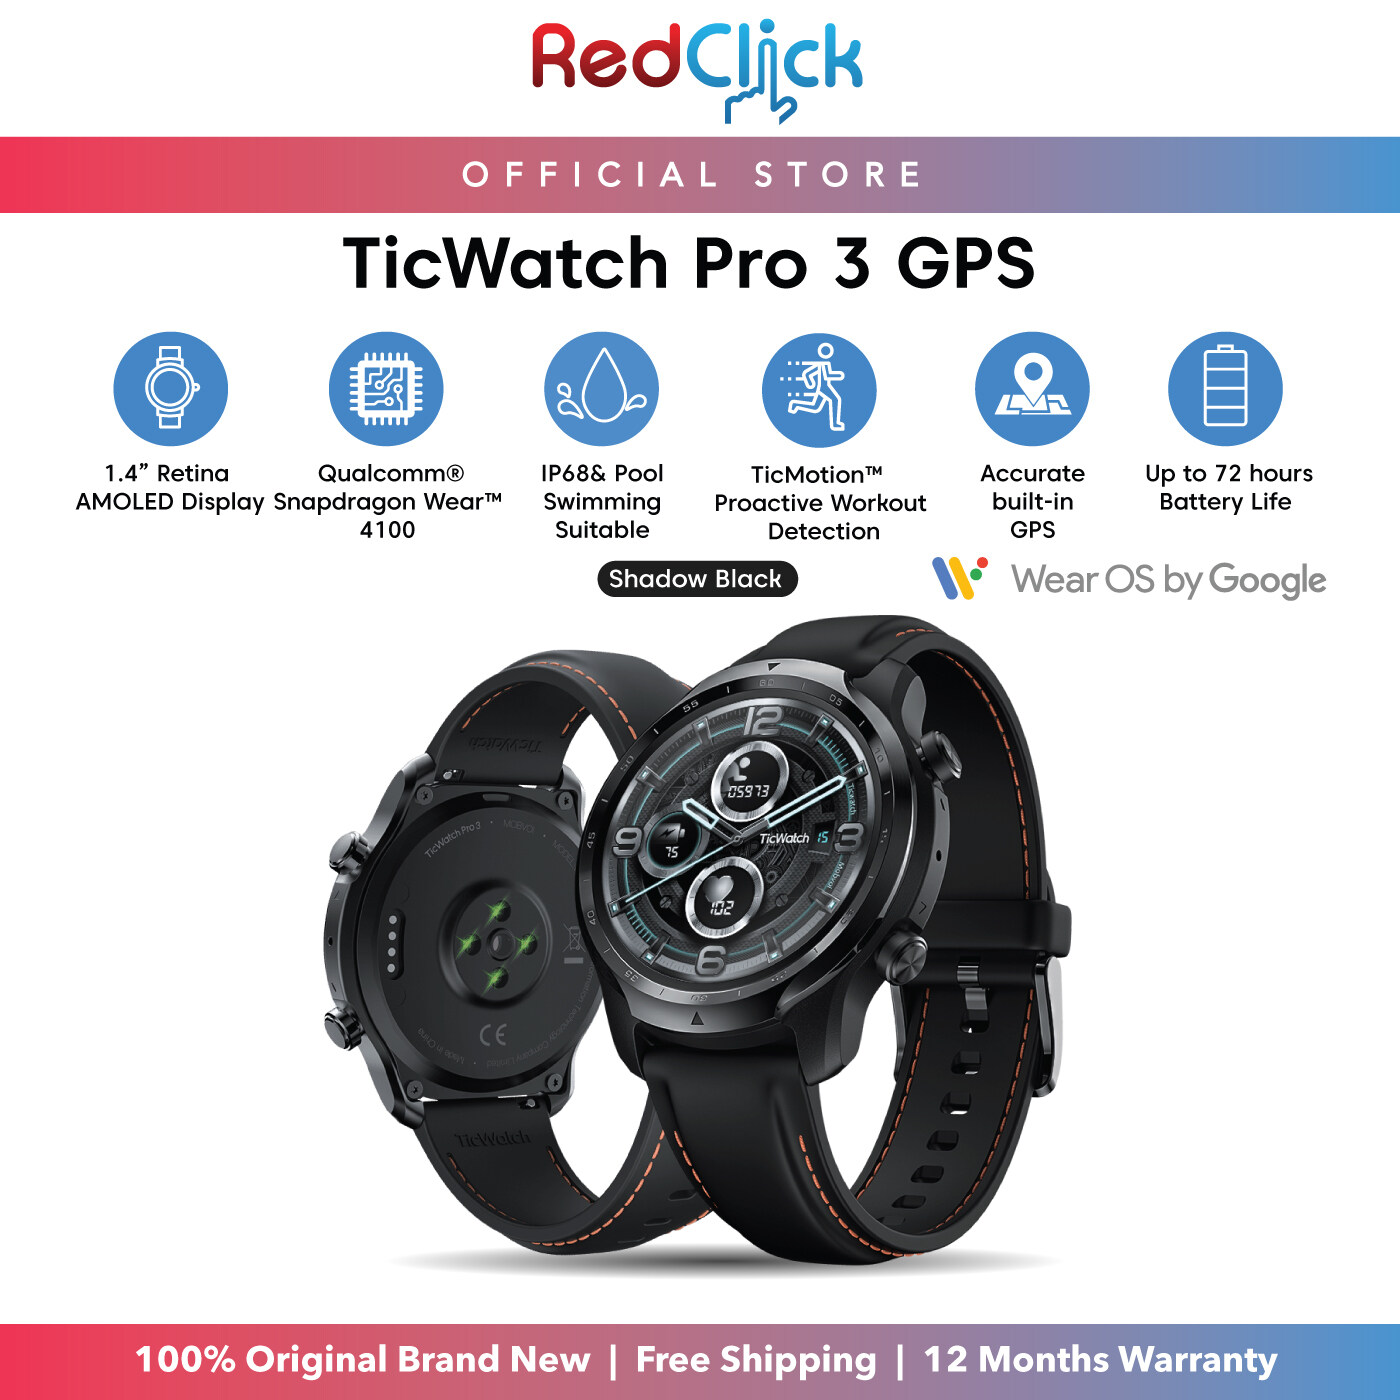 Mobvoi TicWatch Pro 3 GPS 1.4" Retina AMOLED Colorful Dual Layer Display Wear OS Compatible With Mobvoi App